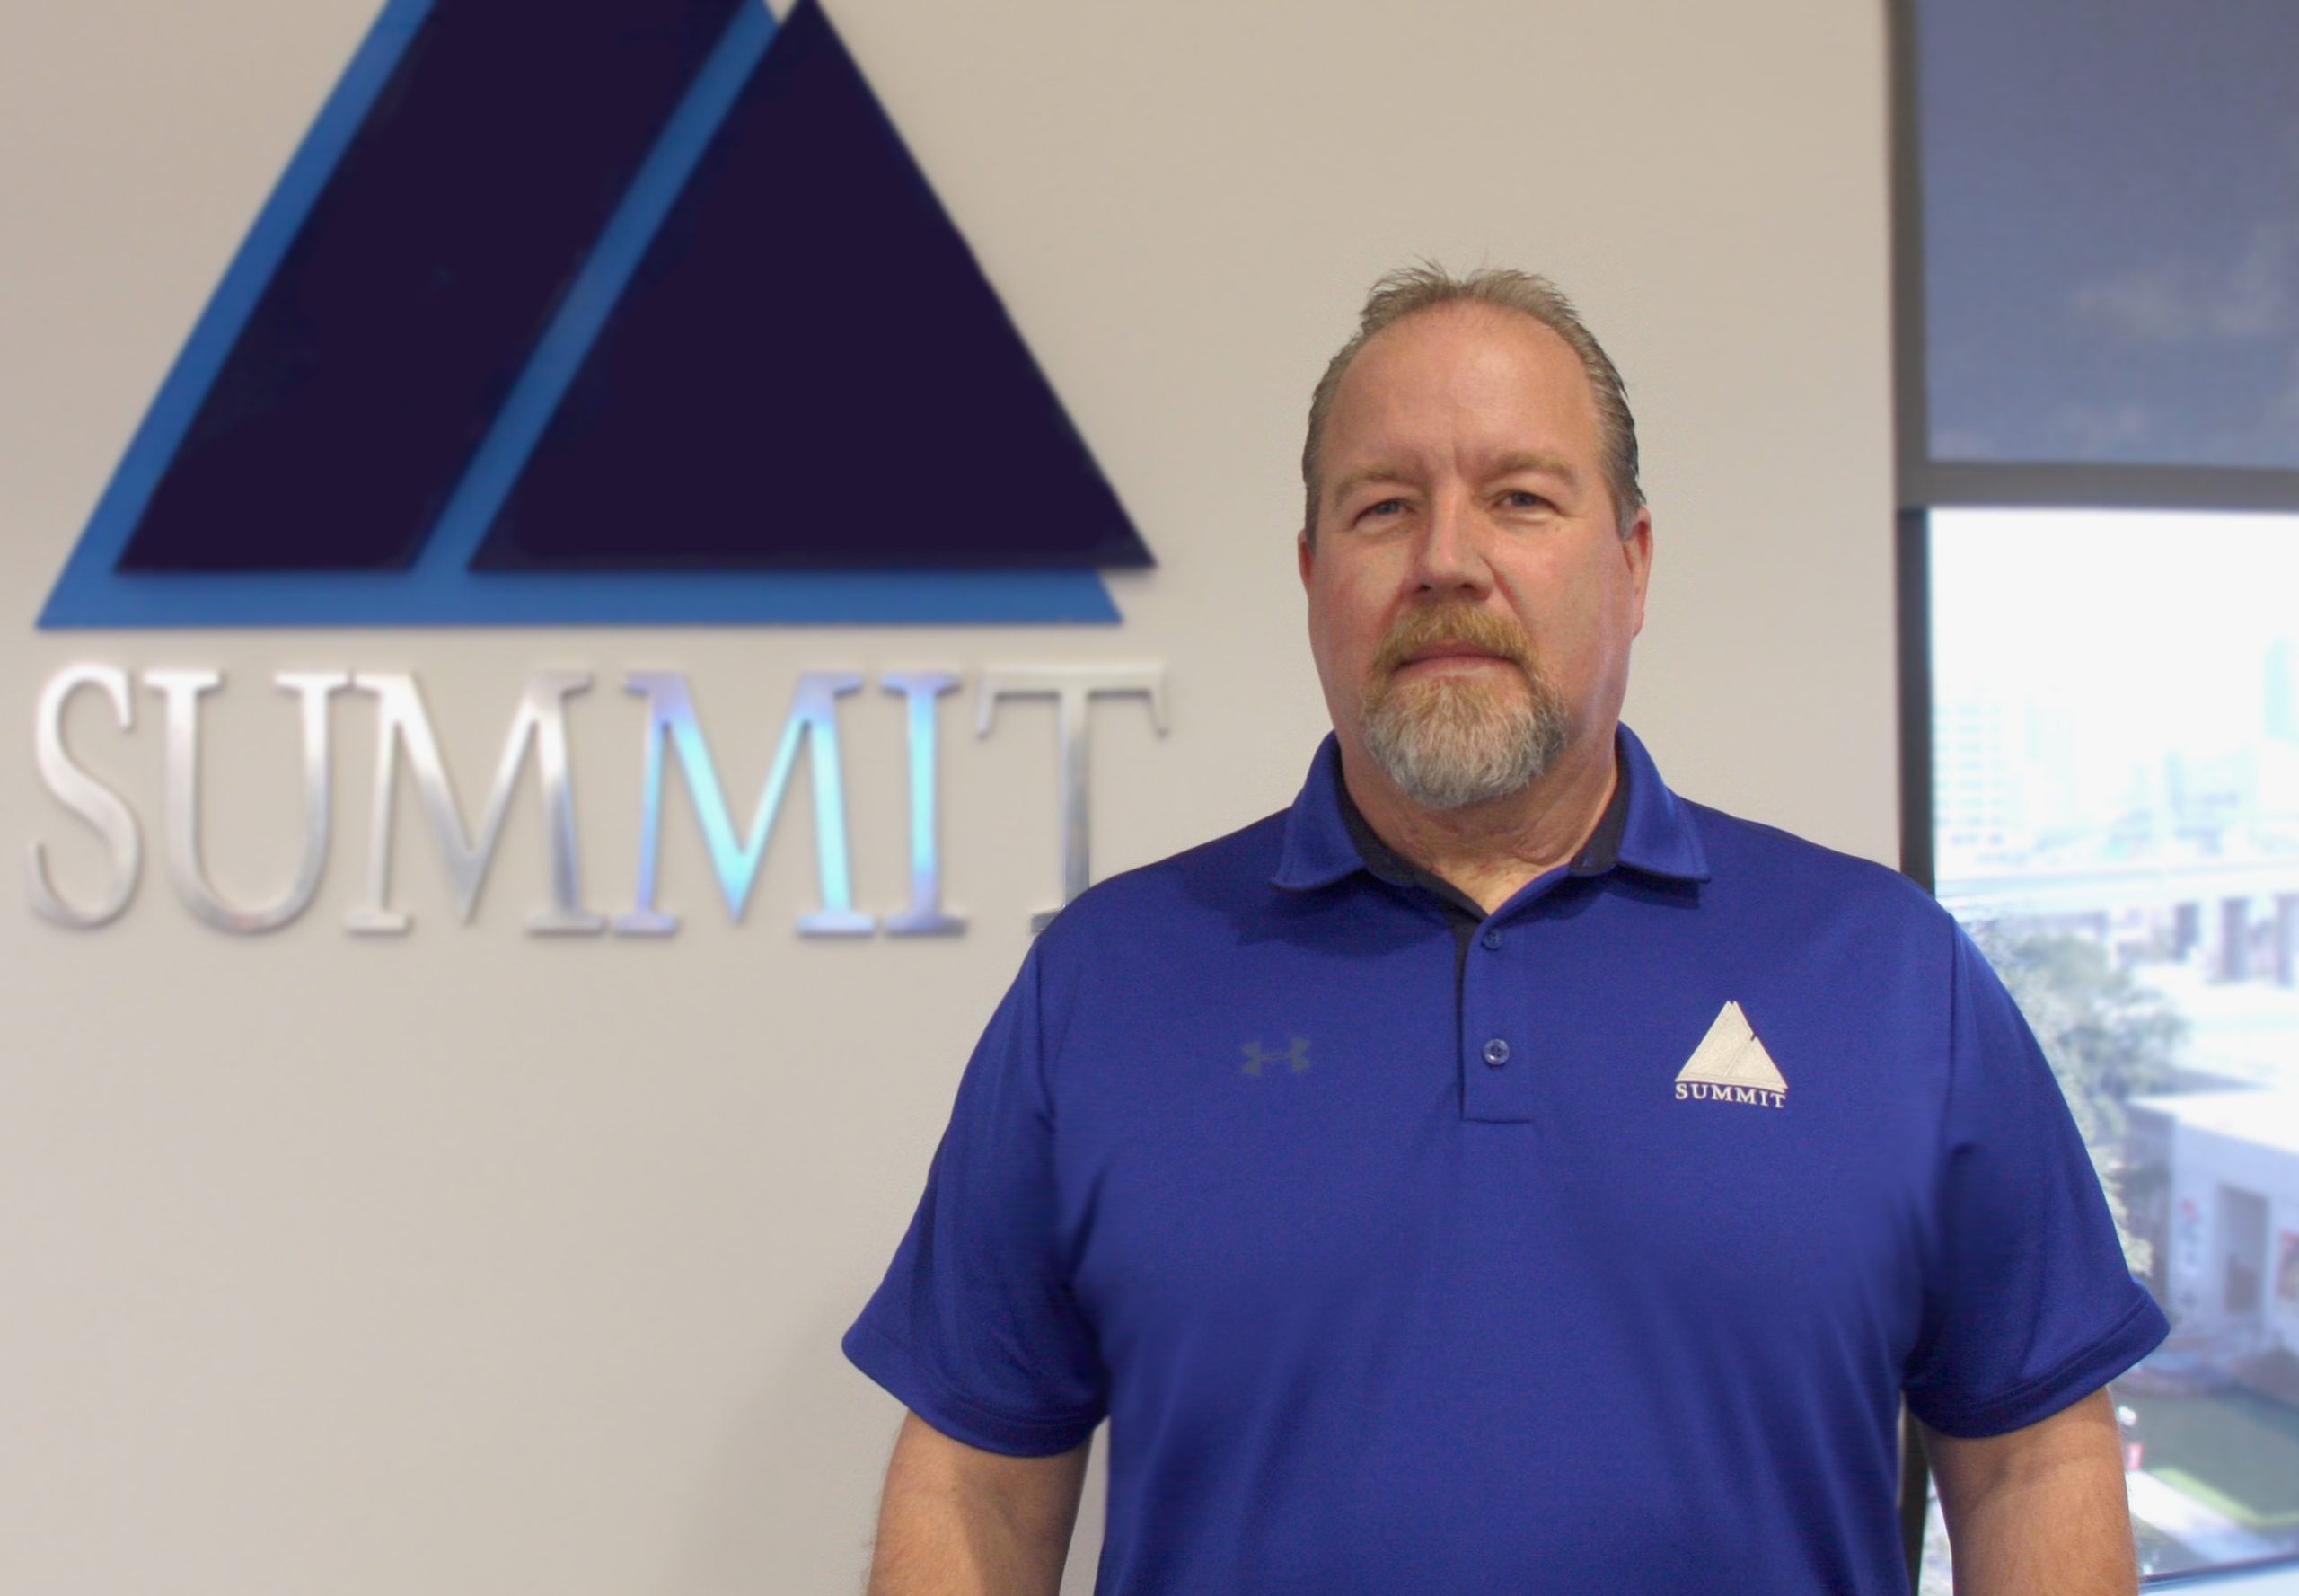 Portrait of Tom Born in front of Summit Logo